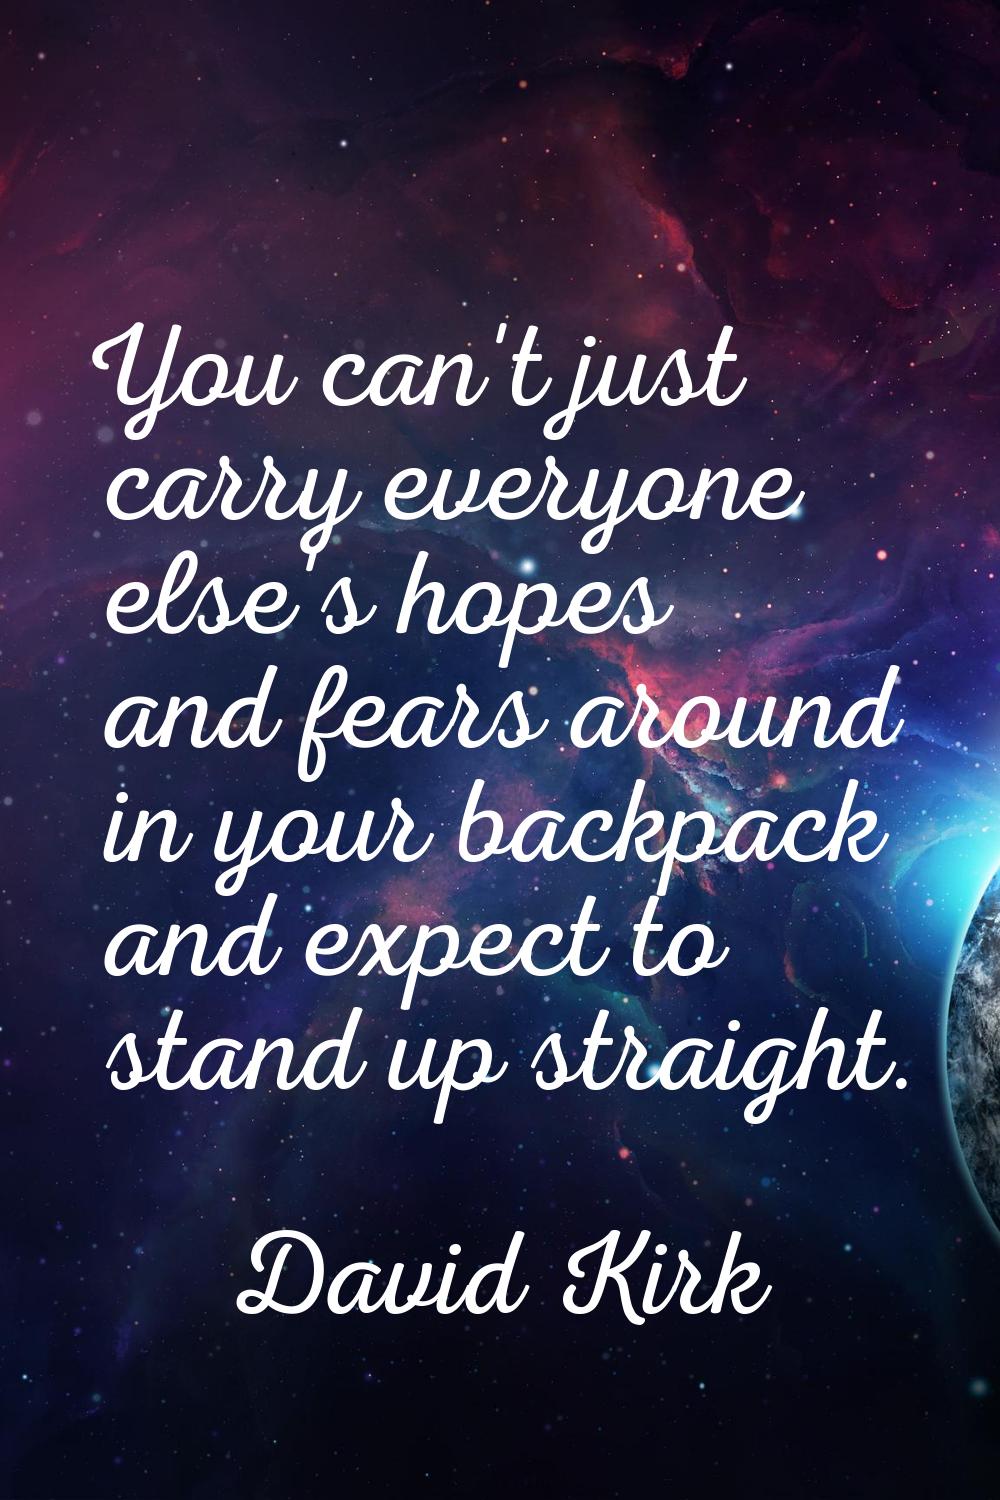 You can't just carry everyone else's hopes and fears around in your backpack and expect to stand up